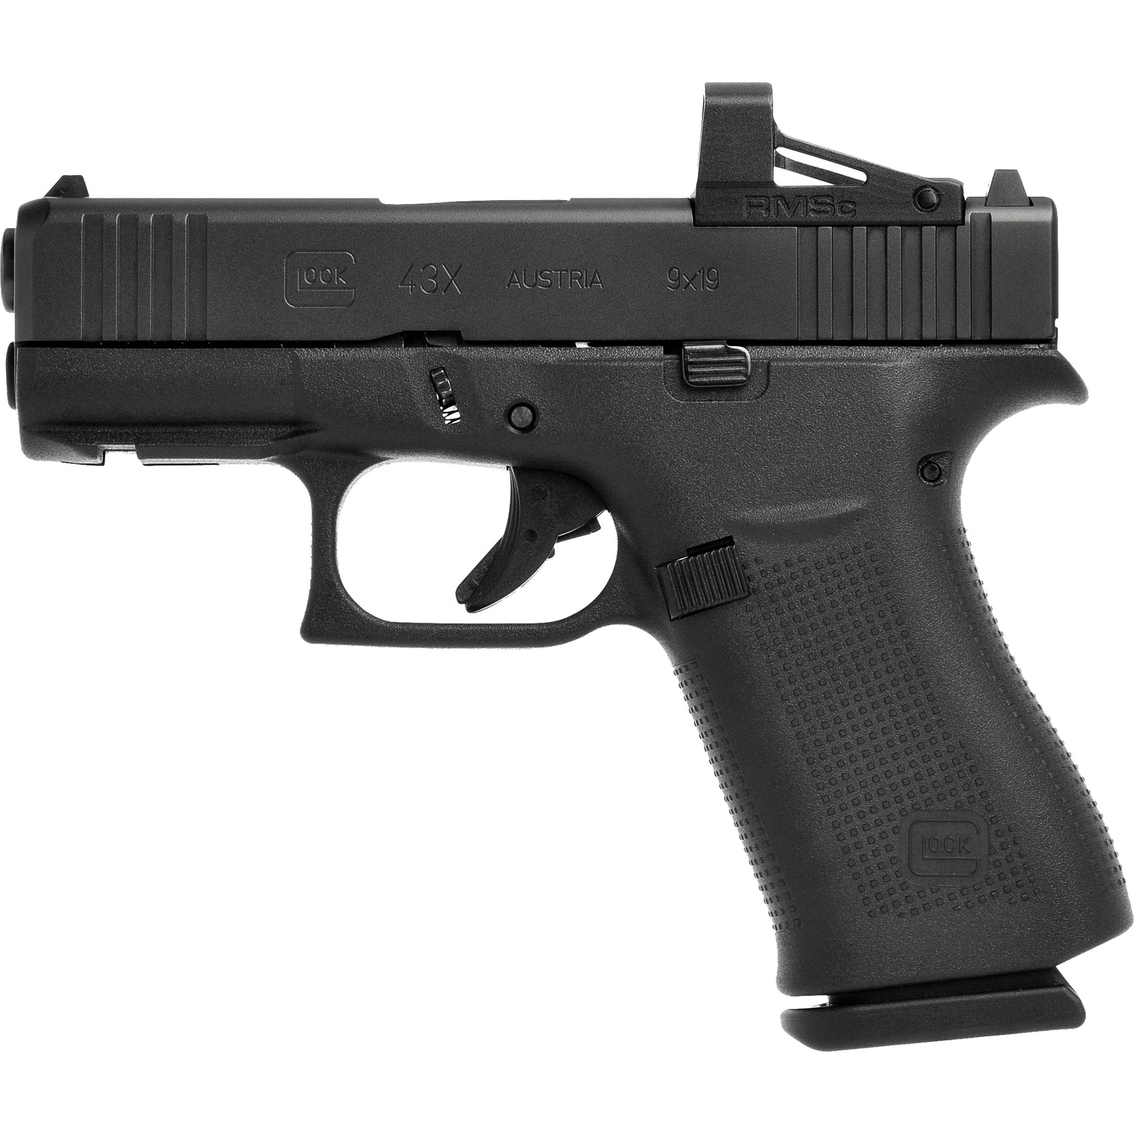 Glock 43X MOS 9mm 3.41 in. Barrel with Red Dot Sight 10 Rnd Pistol Black - Image 3 of 3